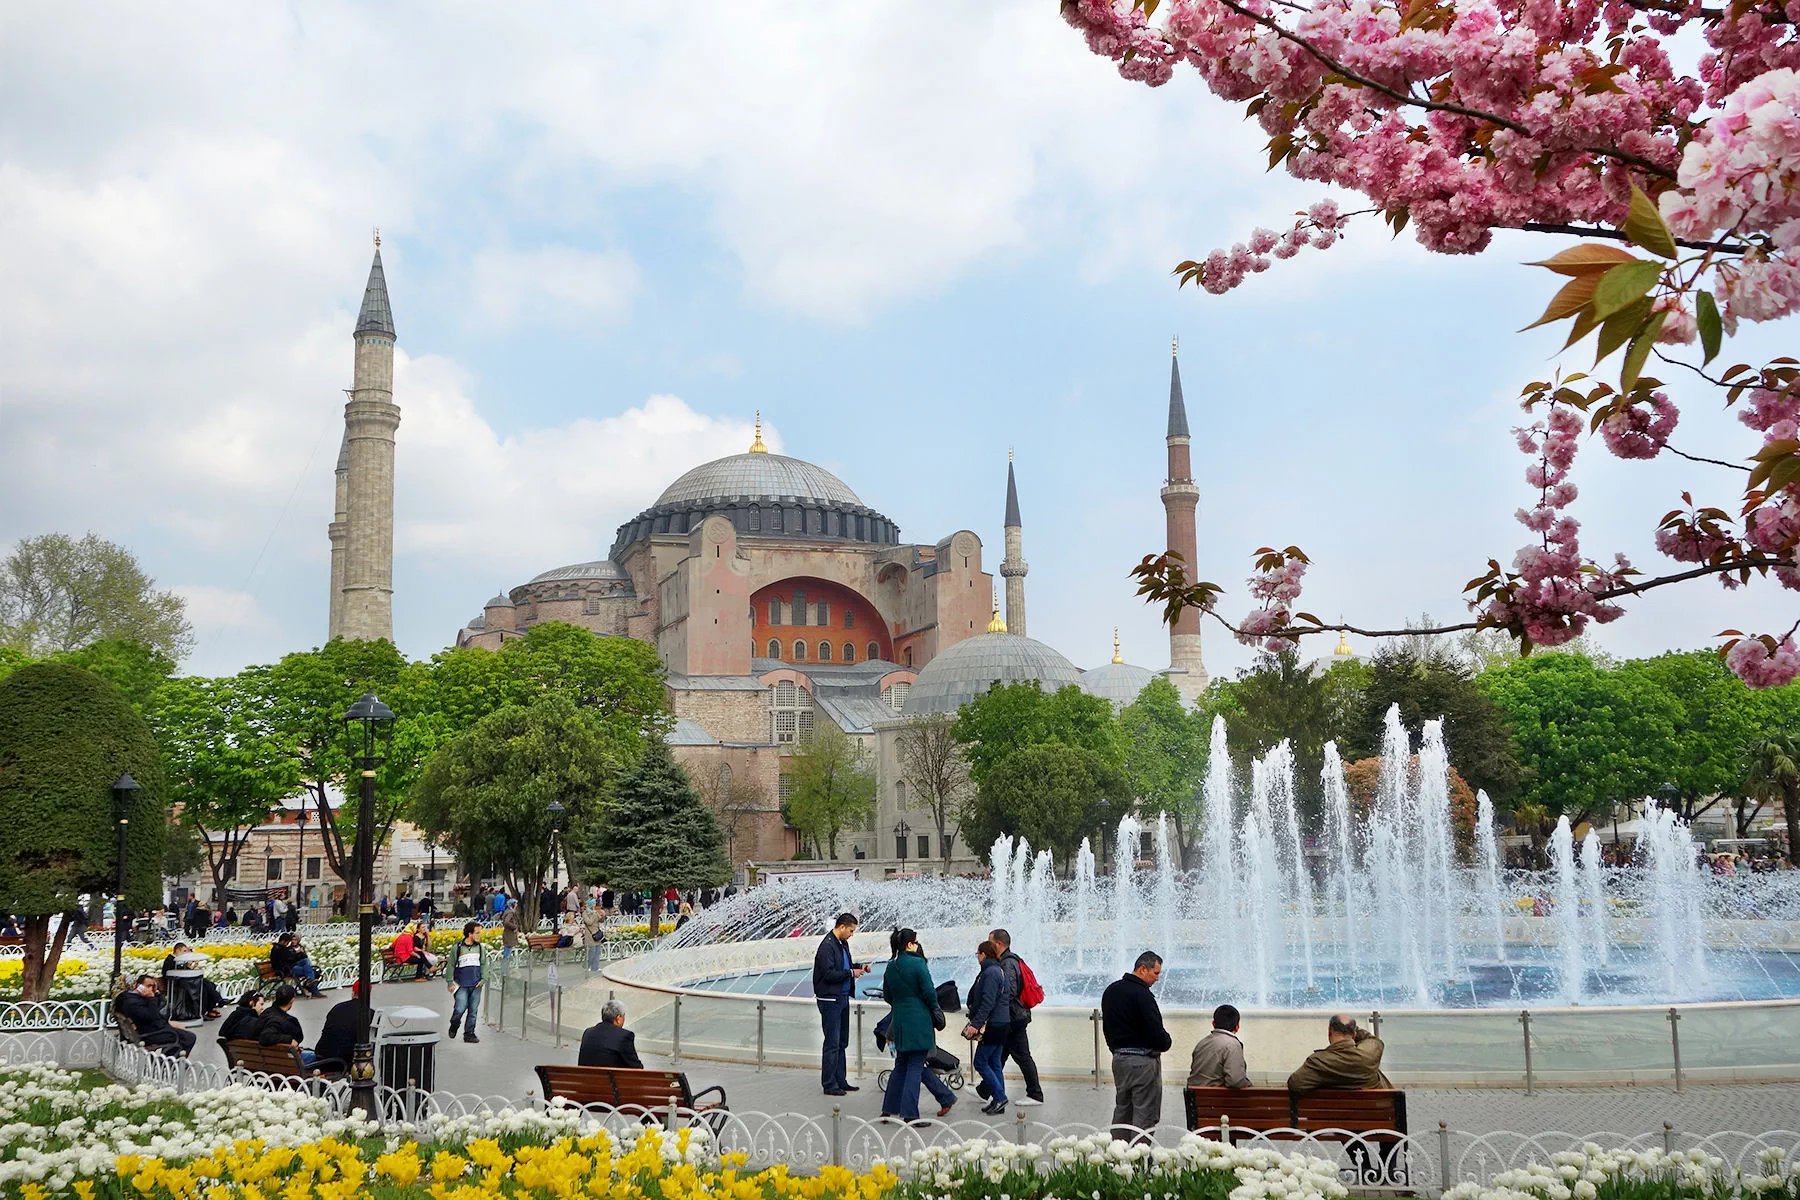 Built by the Byzantine Emperor Justinian in the early sixth century on the grandest scale possible, the Hagia Sophia was later converted into a mosque by the conquering Ottomans